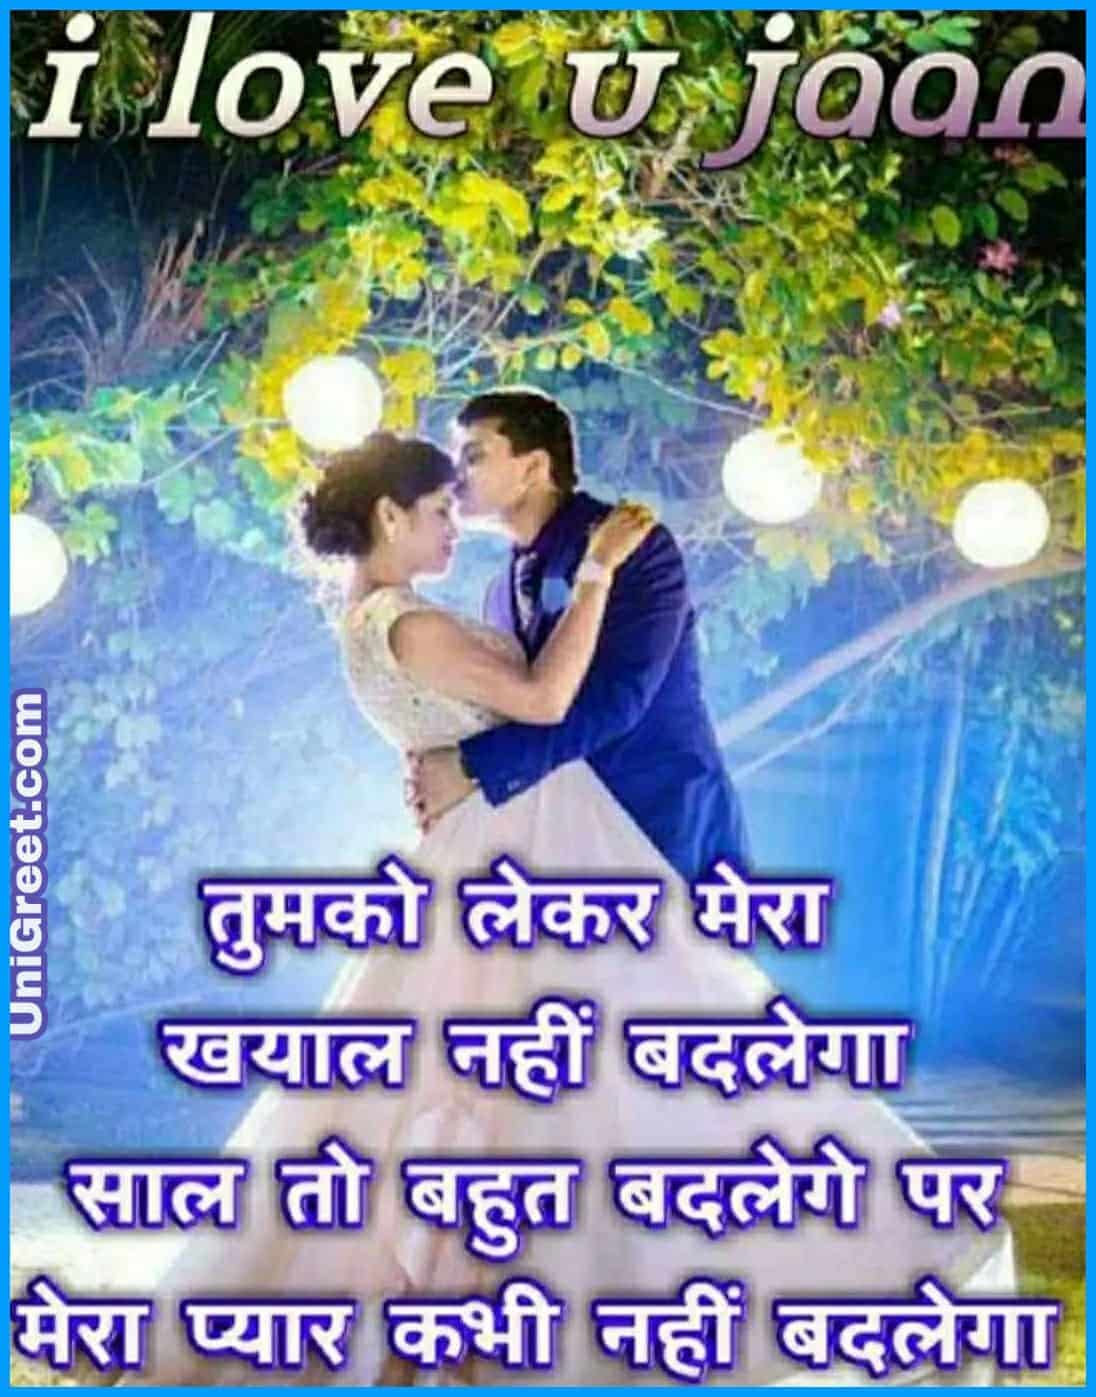 Status dating in love for hindi 2021 best husband ❤️ and best love